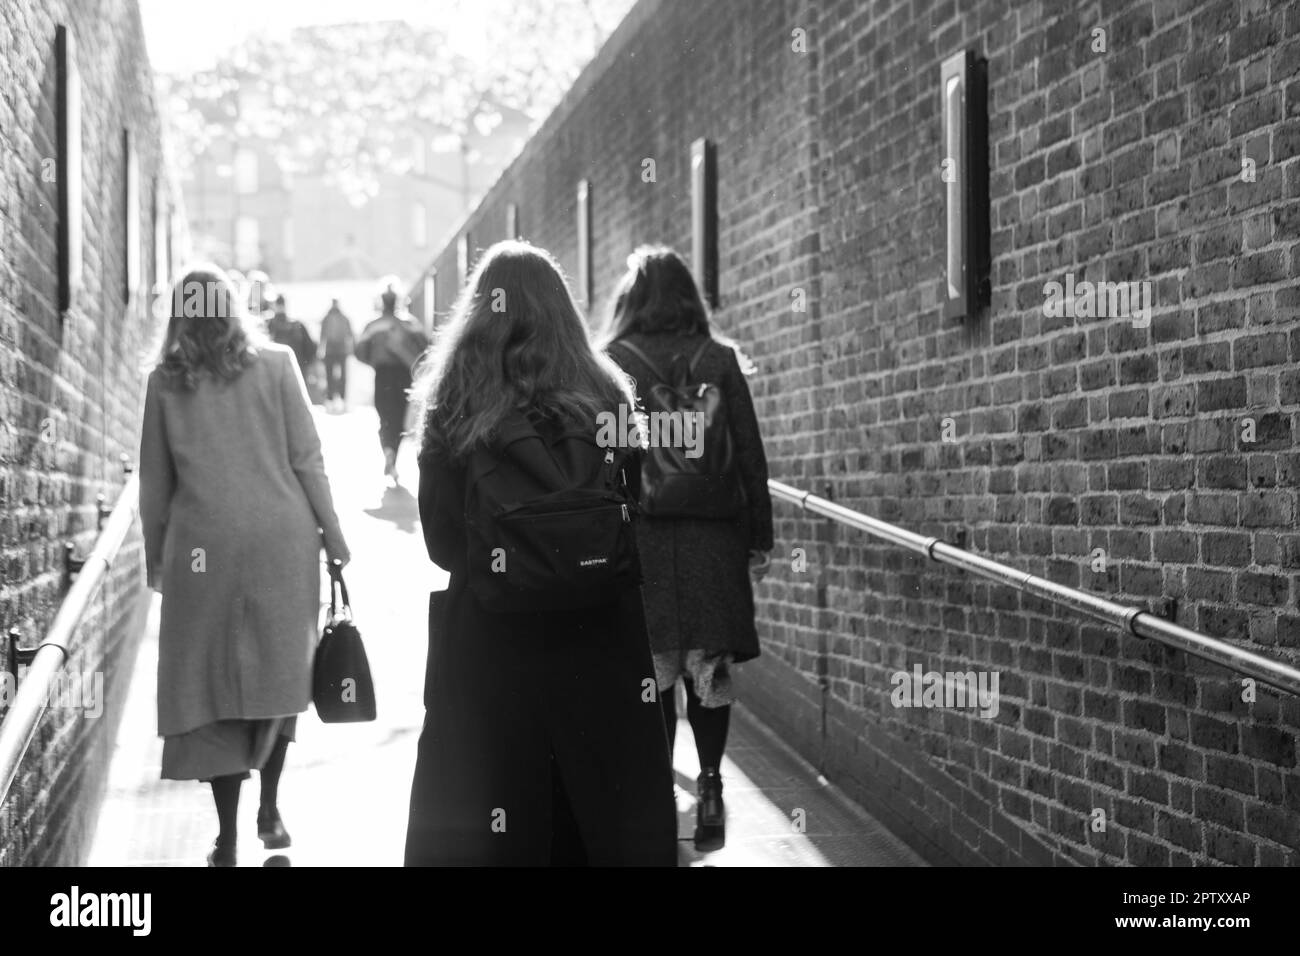 London, UK, 25 April 2023: At Pimlico tube station three women walk up the ramp to exit the station on their way to work. Sunshine beams down on them and spring leaves on a tree can be seen in the distance. Anna Watson/Alamy Stock Photo